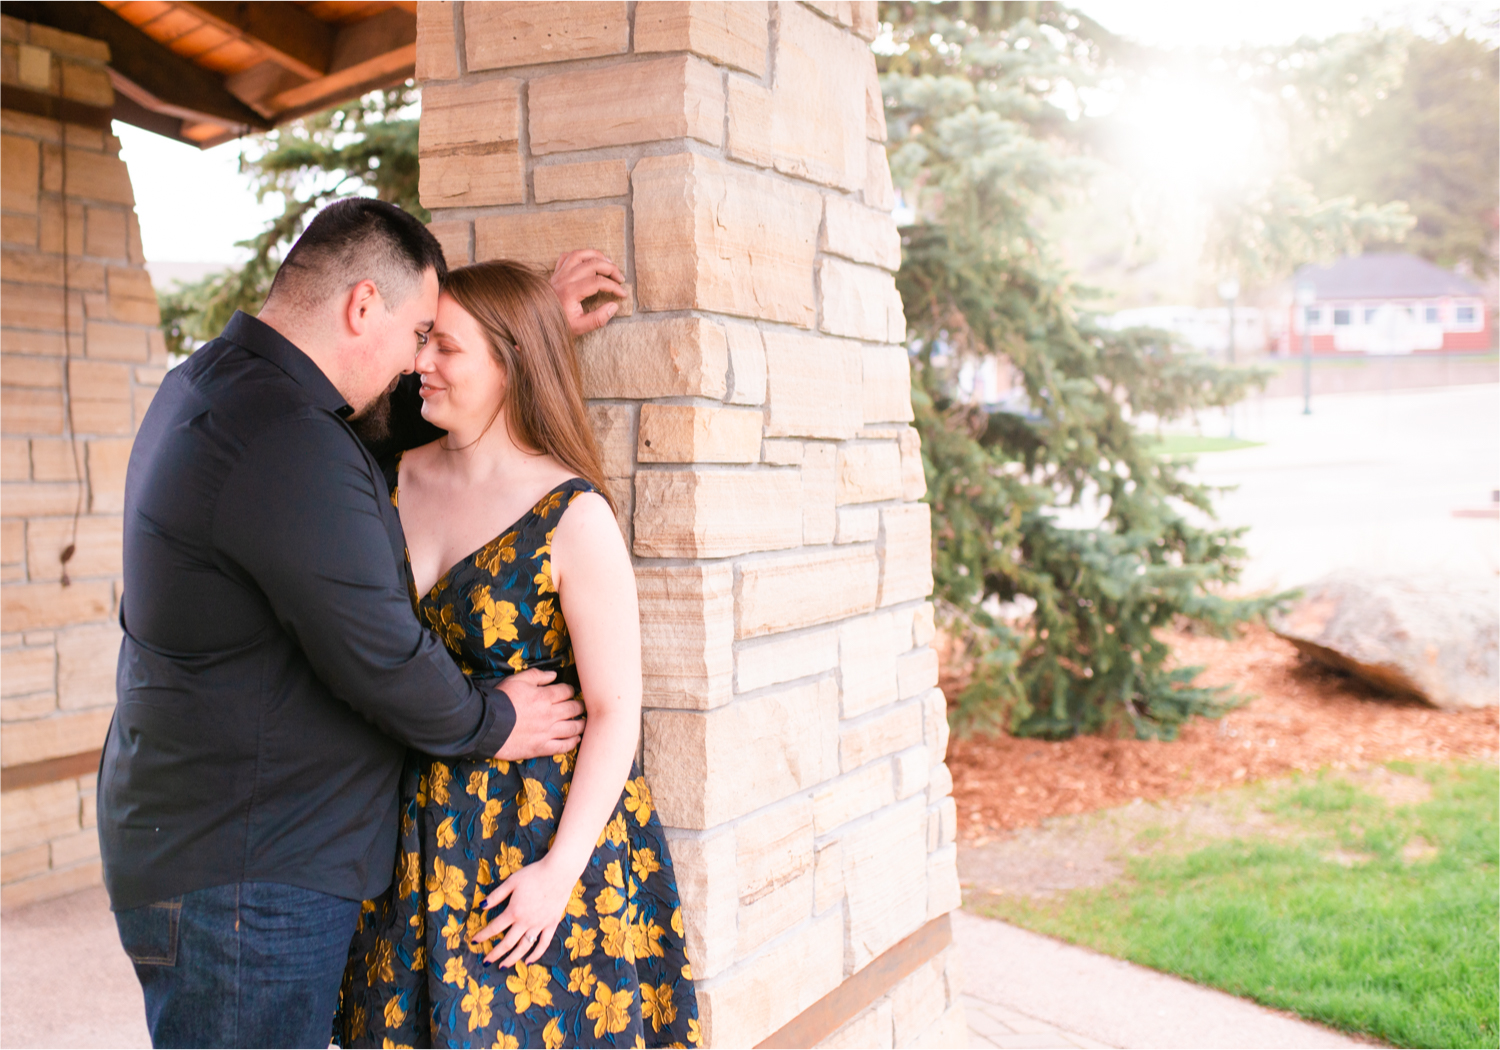 Estes Park Summer Engagement | Britni Girard Photography | Colorado Wedding Photography and Videography Team | Adventures along trails overlooking the mountains, followed by a romantic stroll in downtown Estes Park and Bond Park